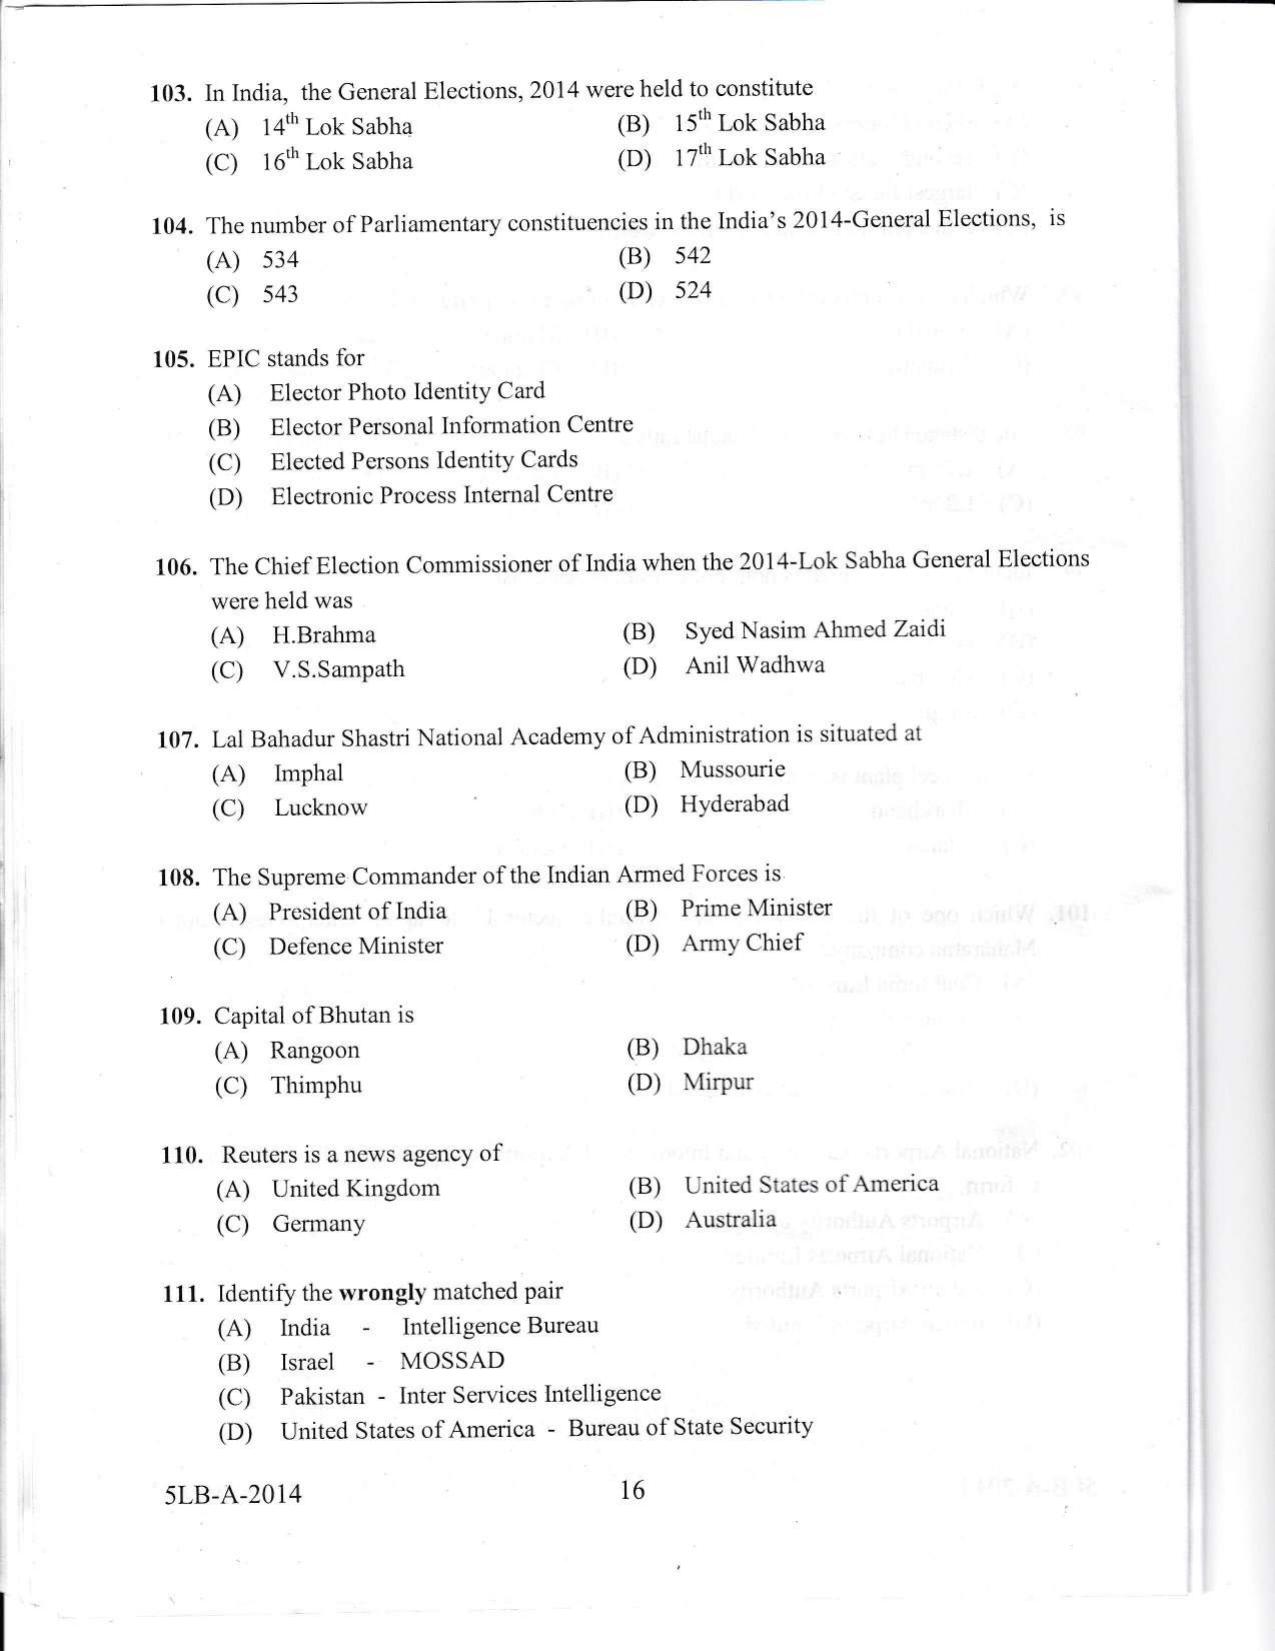 KLEE 5 Year LLB Exam 2014 Question Paper - Page 16